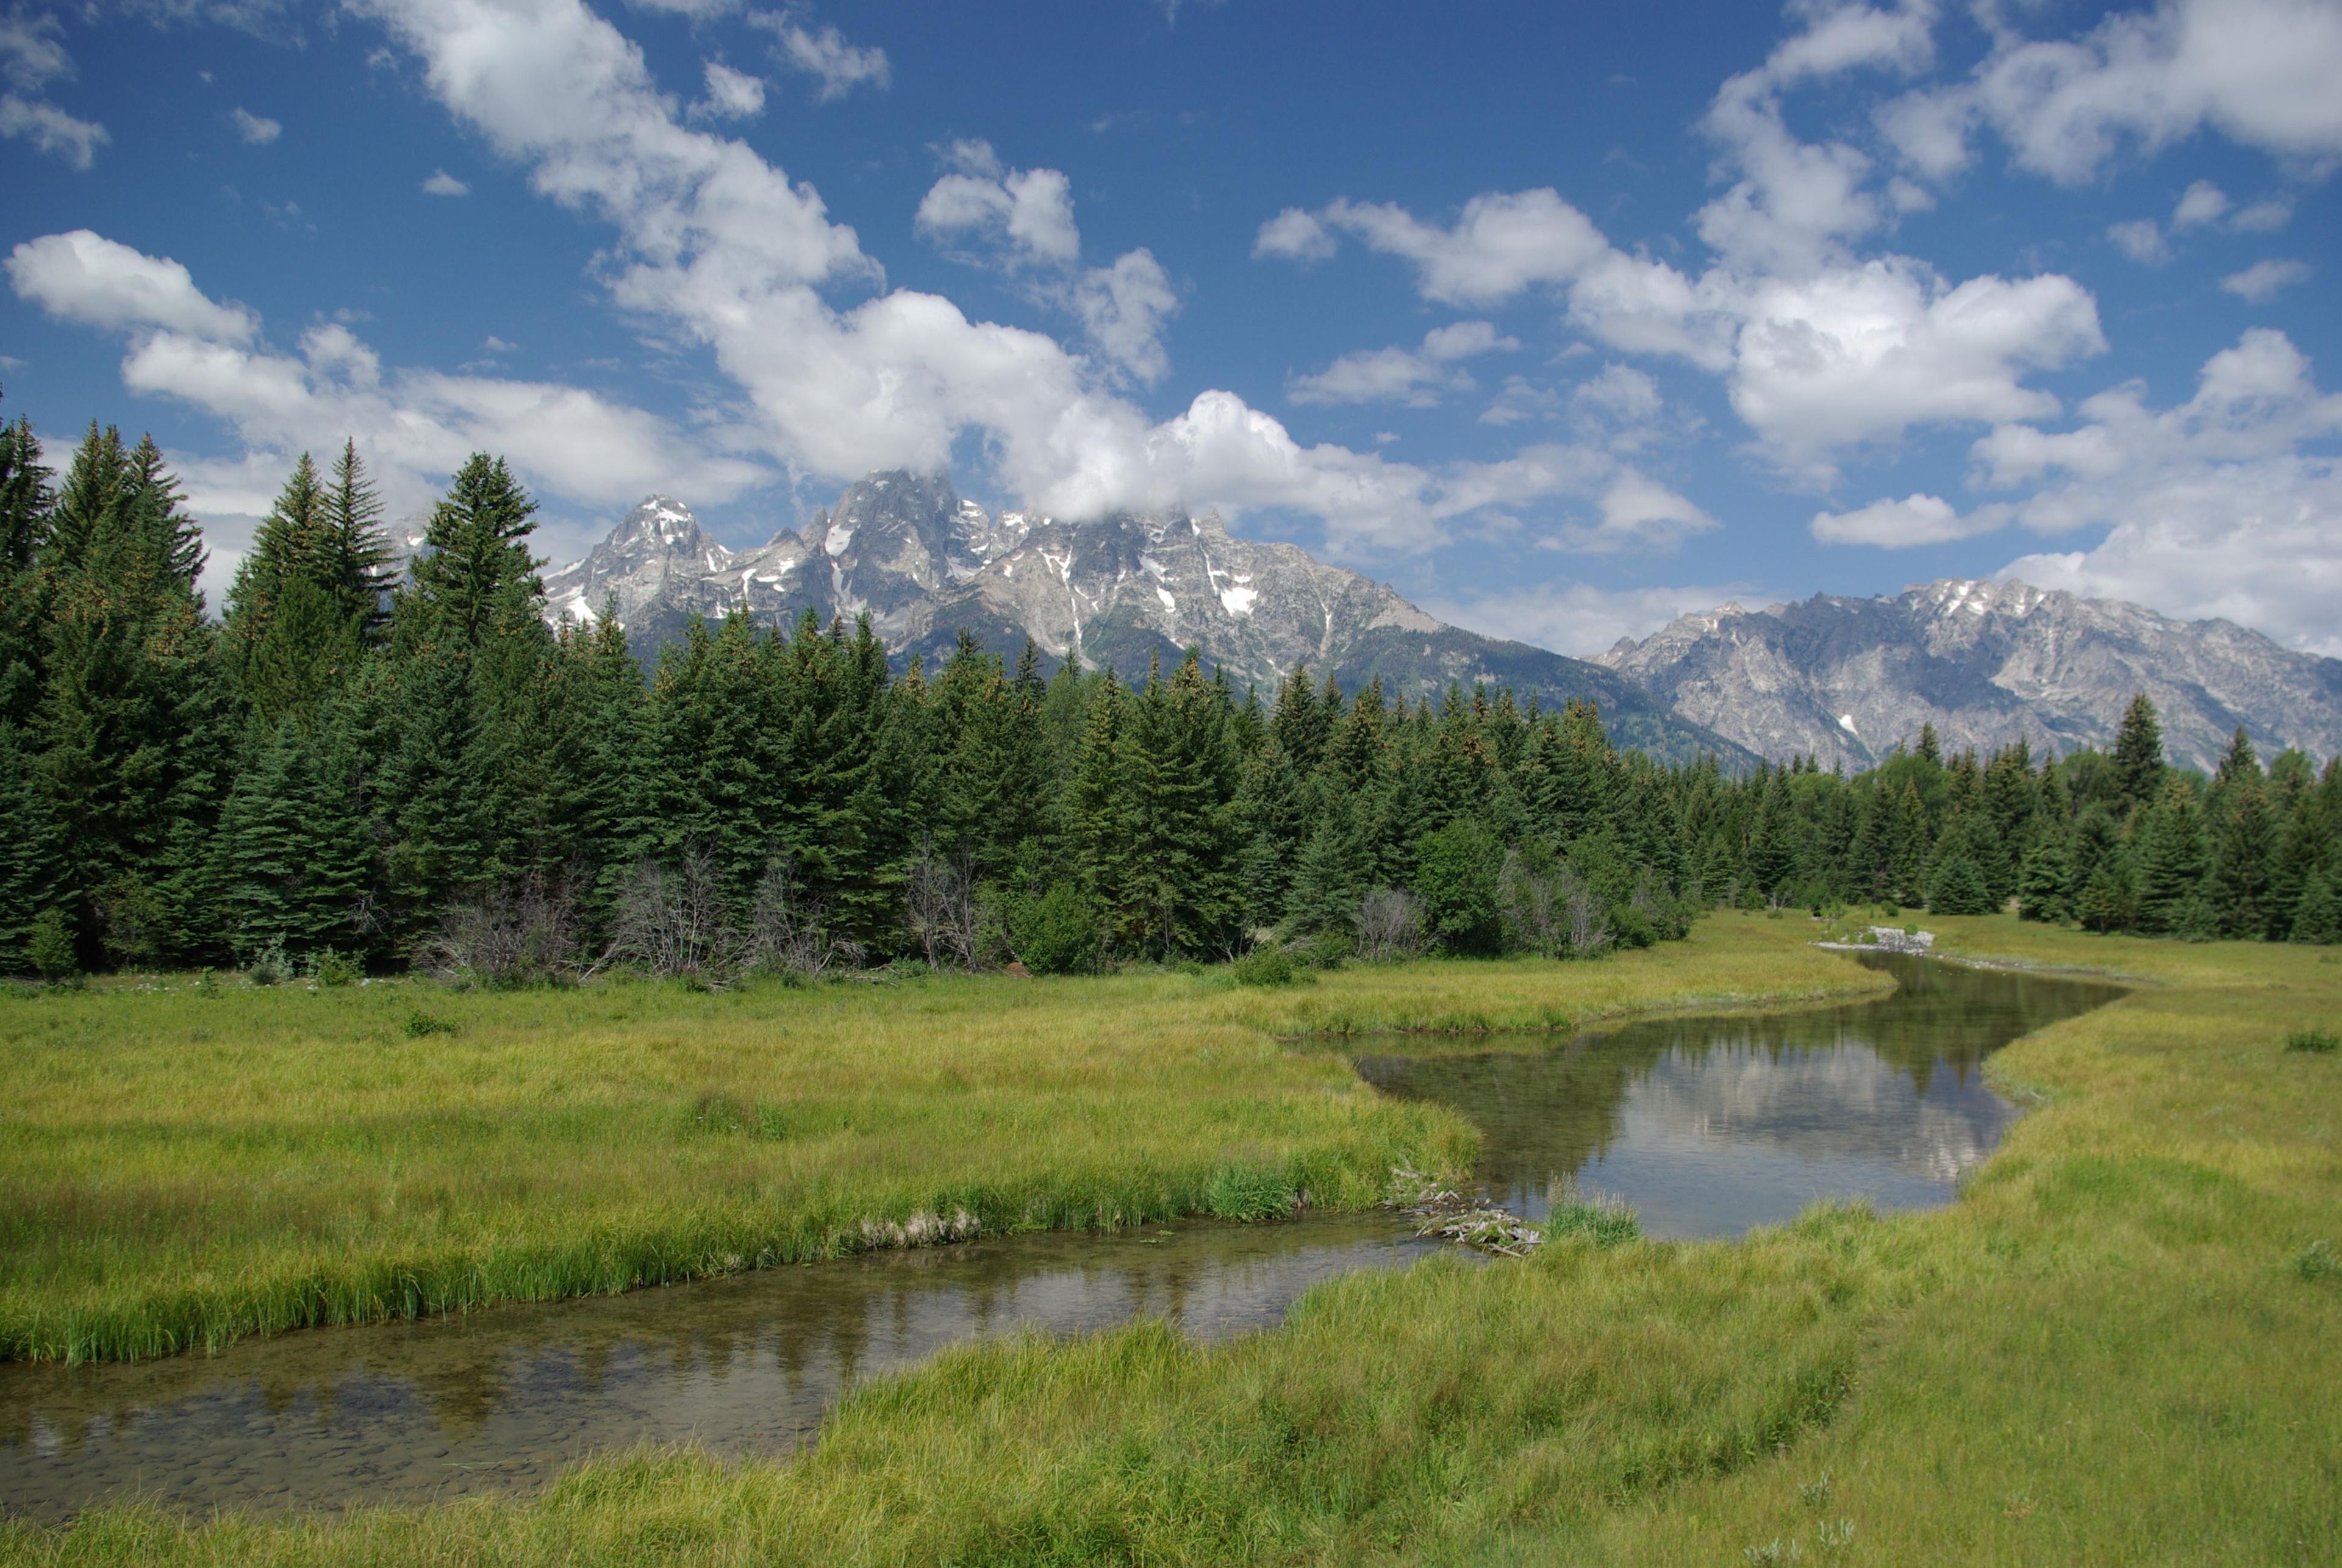 A river runs through Grand Teton National Park with the mountain range in the background.